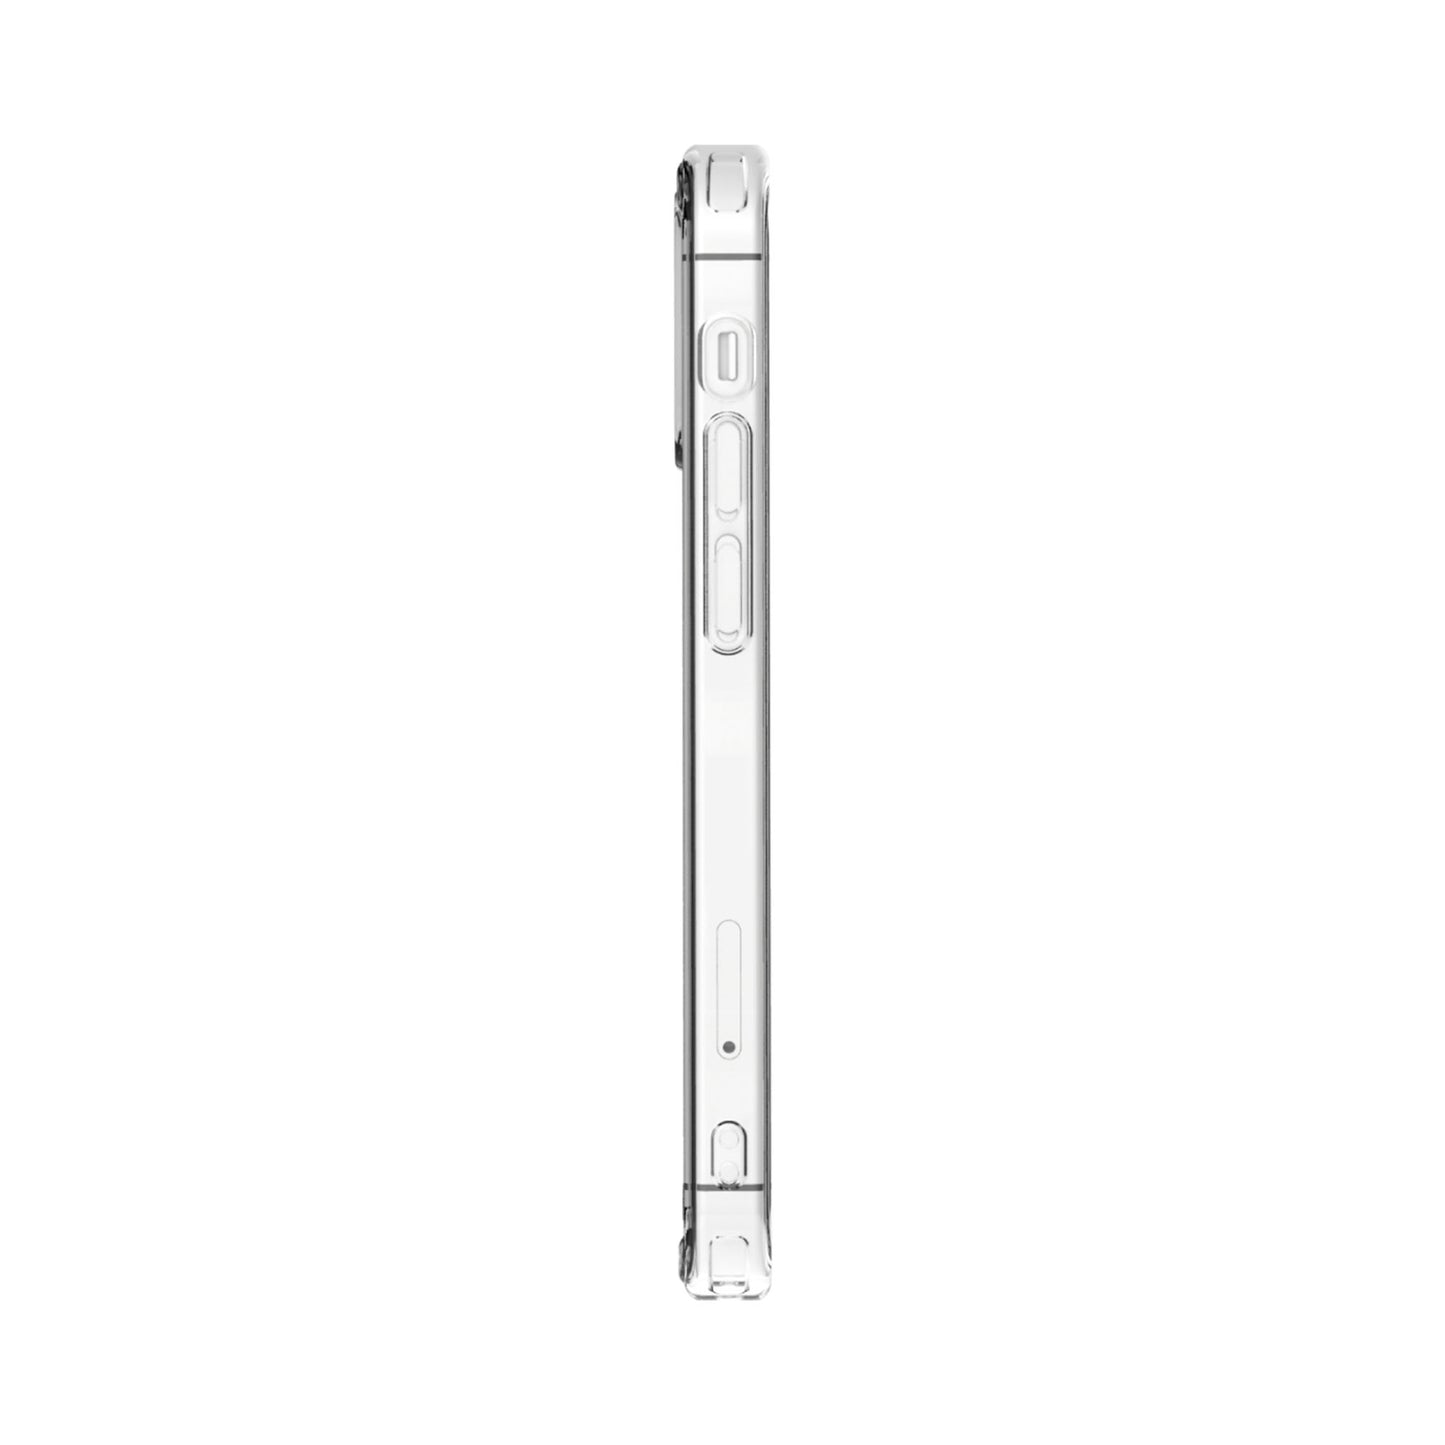 JUST MOBILE Tenc Air for iPhone 12/12 Pro - Crystal Clear